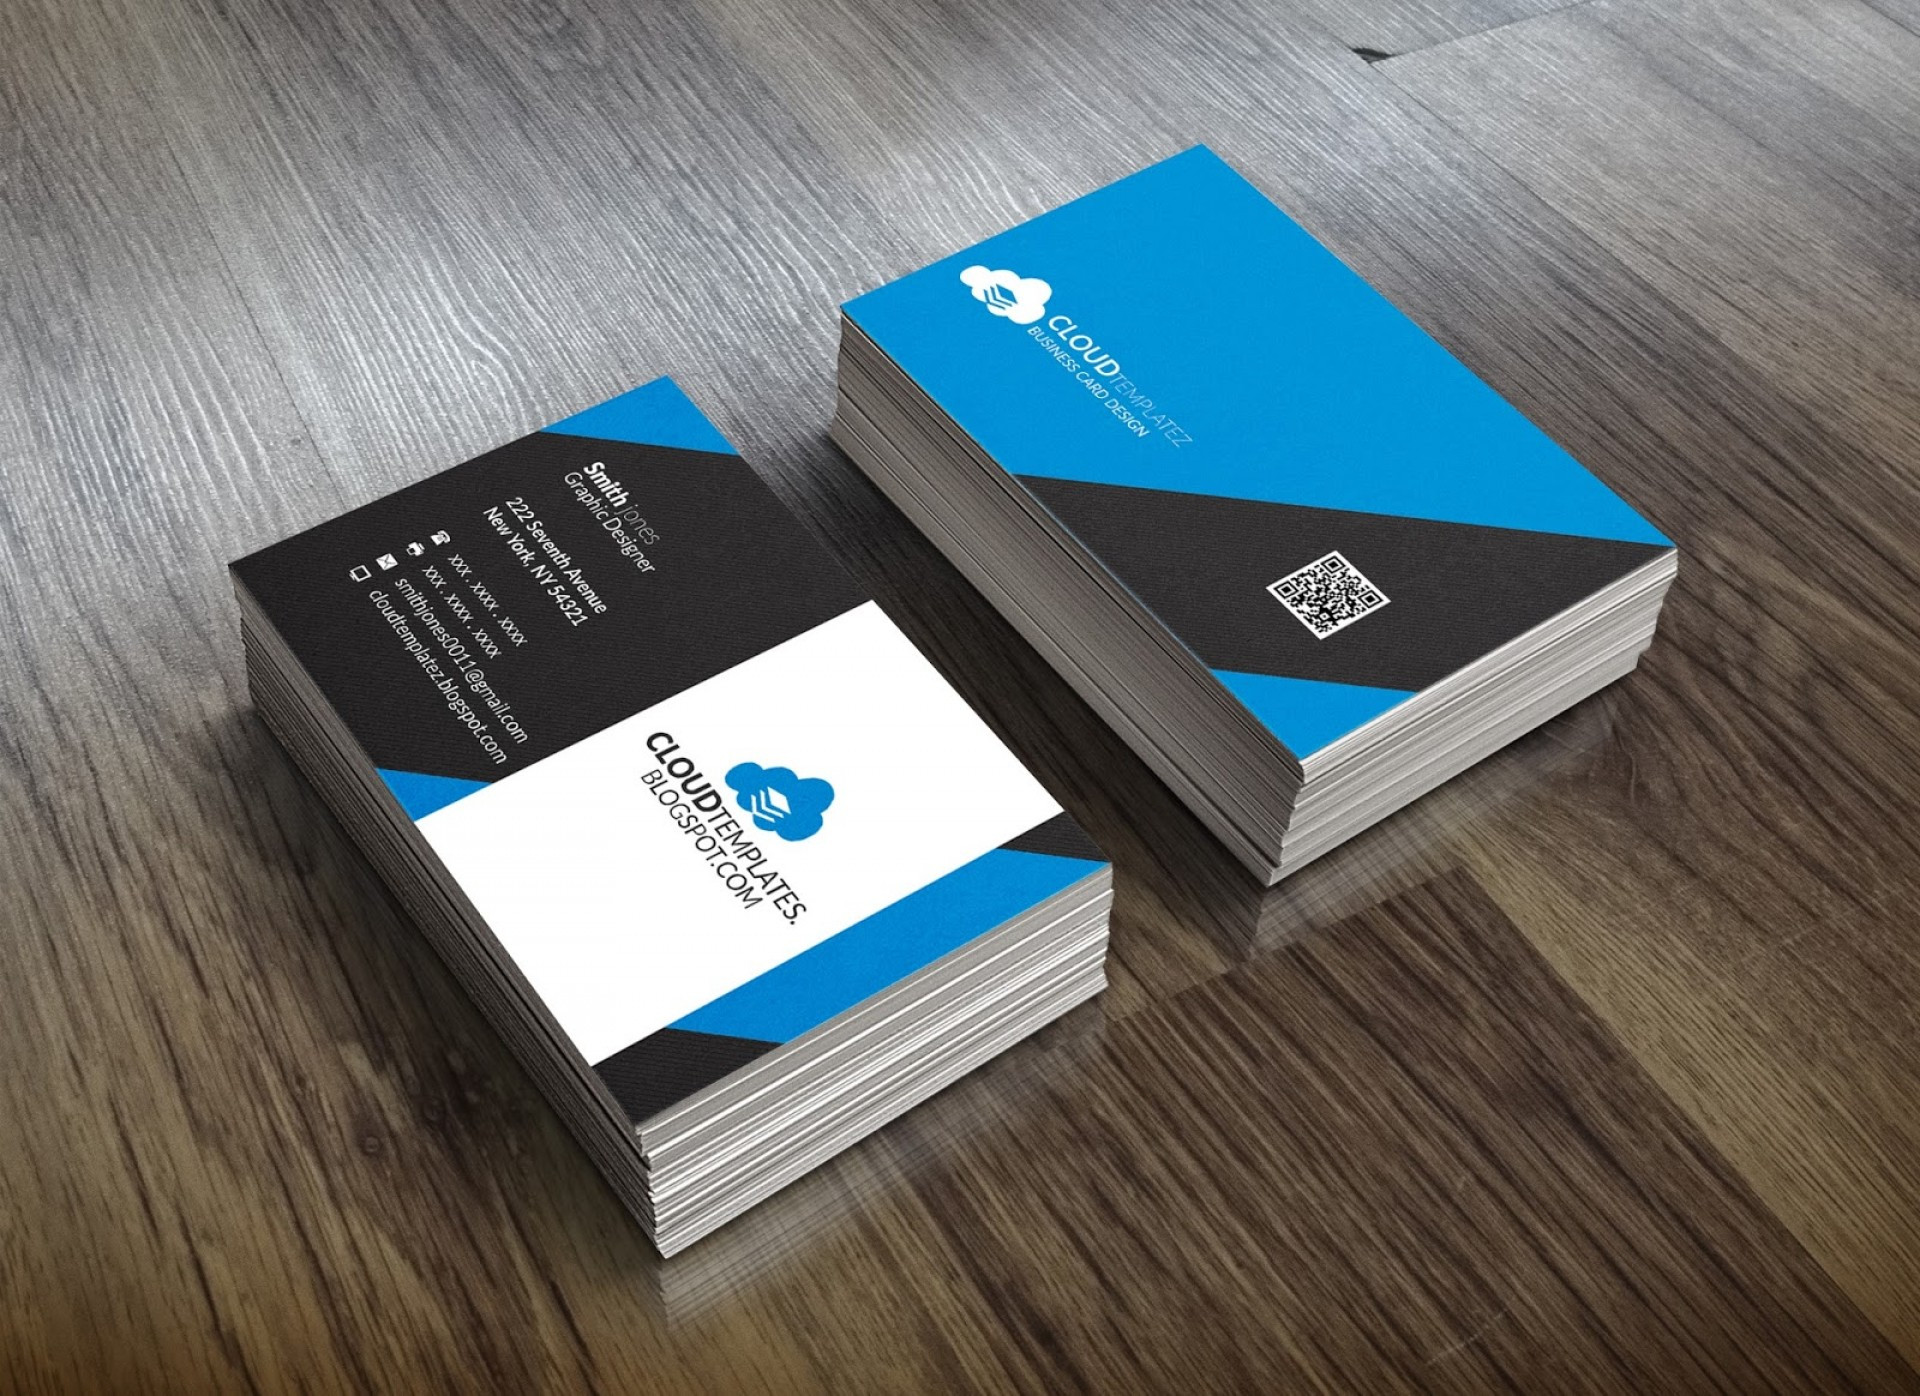 013 template ideas business cards free templates card 1920x1397